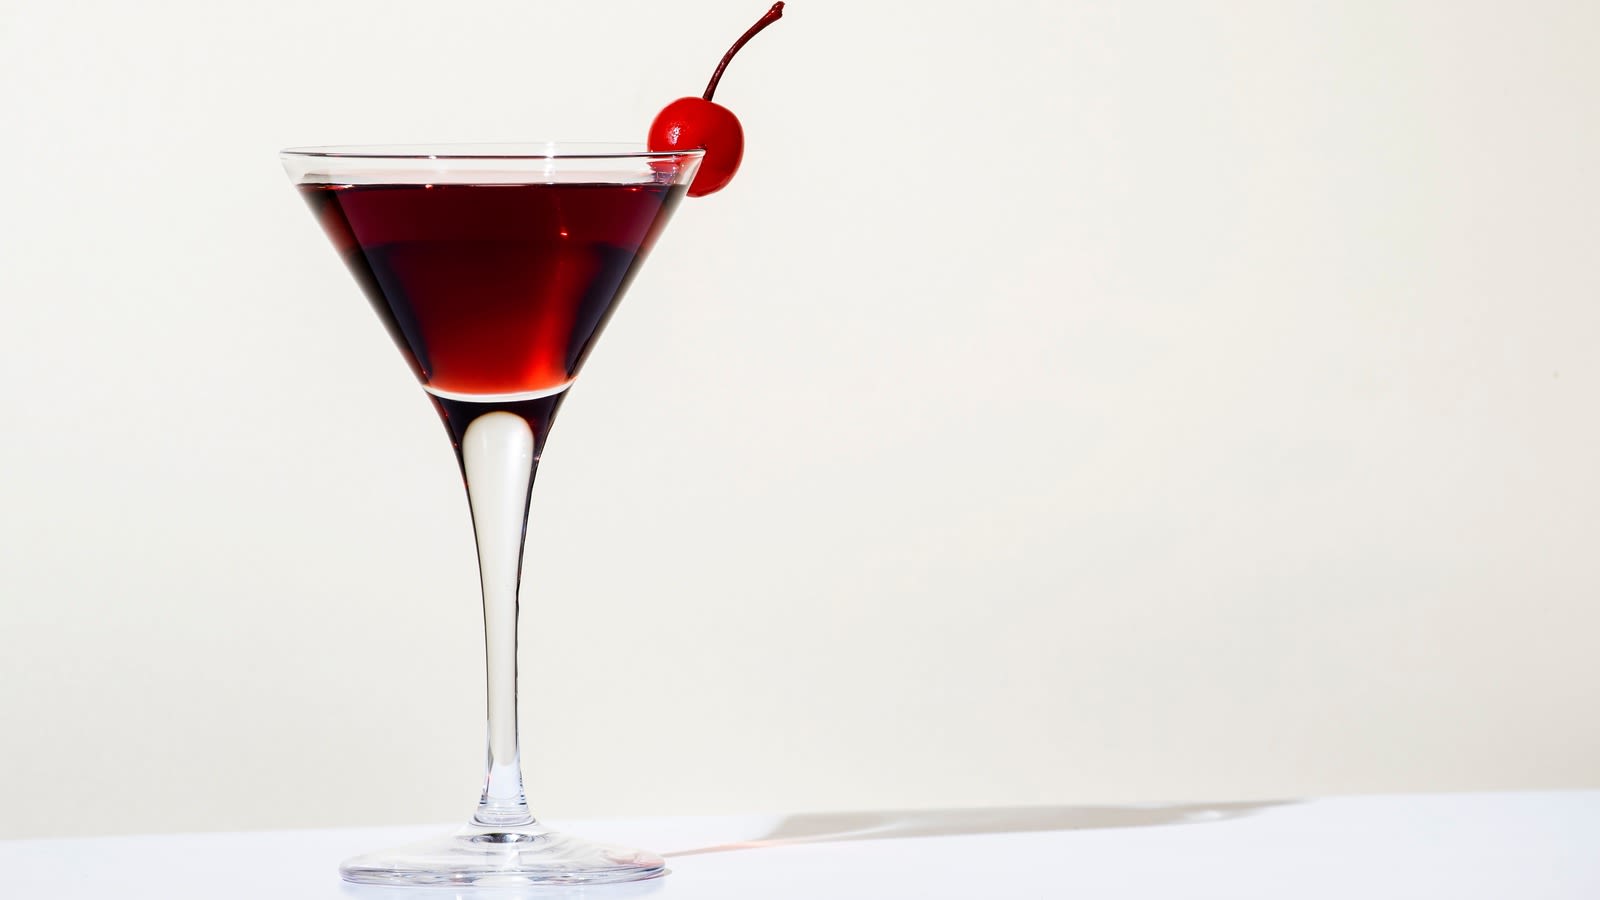 Manhattan Vs Old Fashioned: What Sets These Drinks Apart?